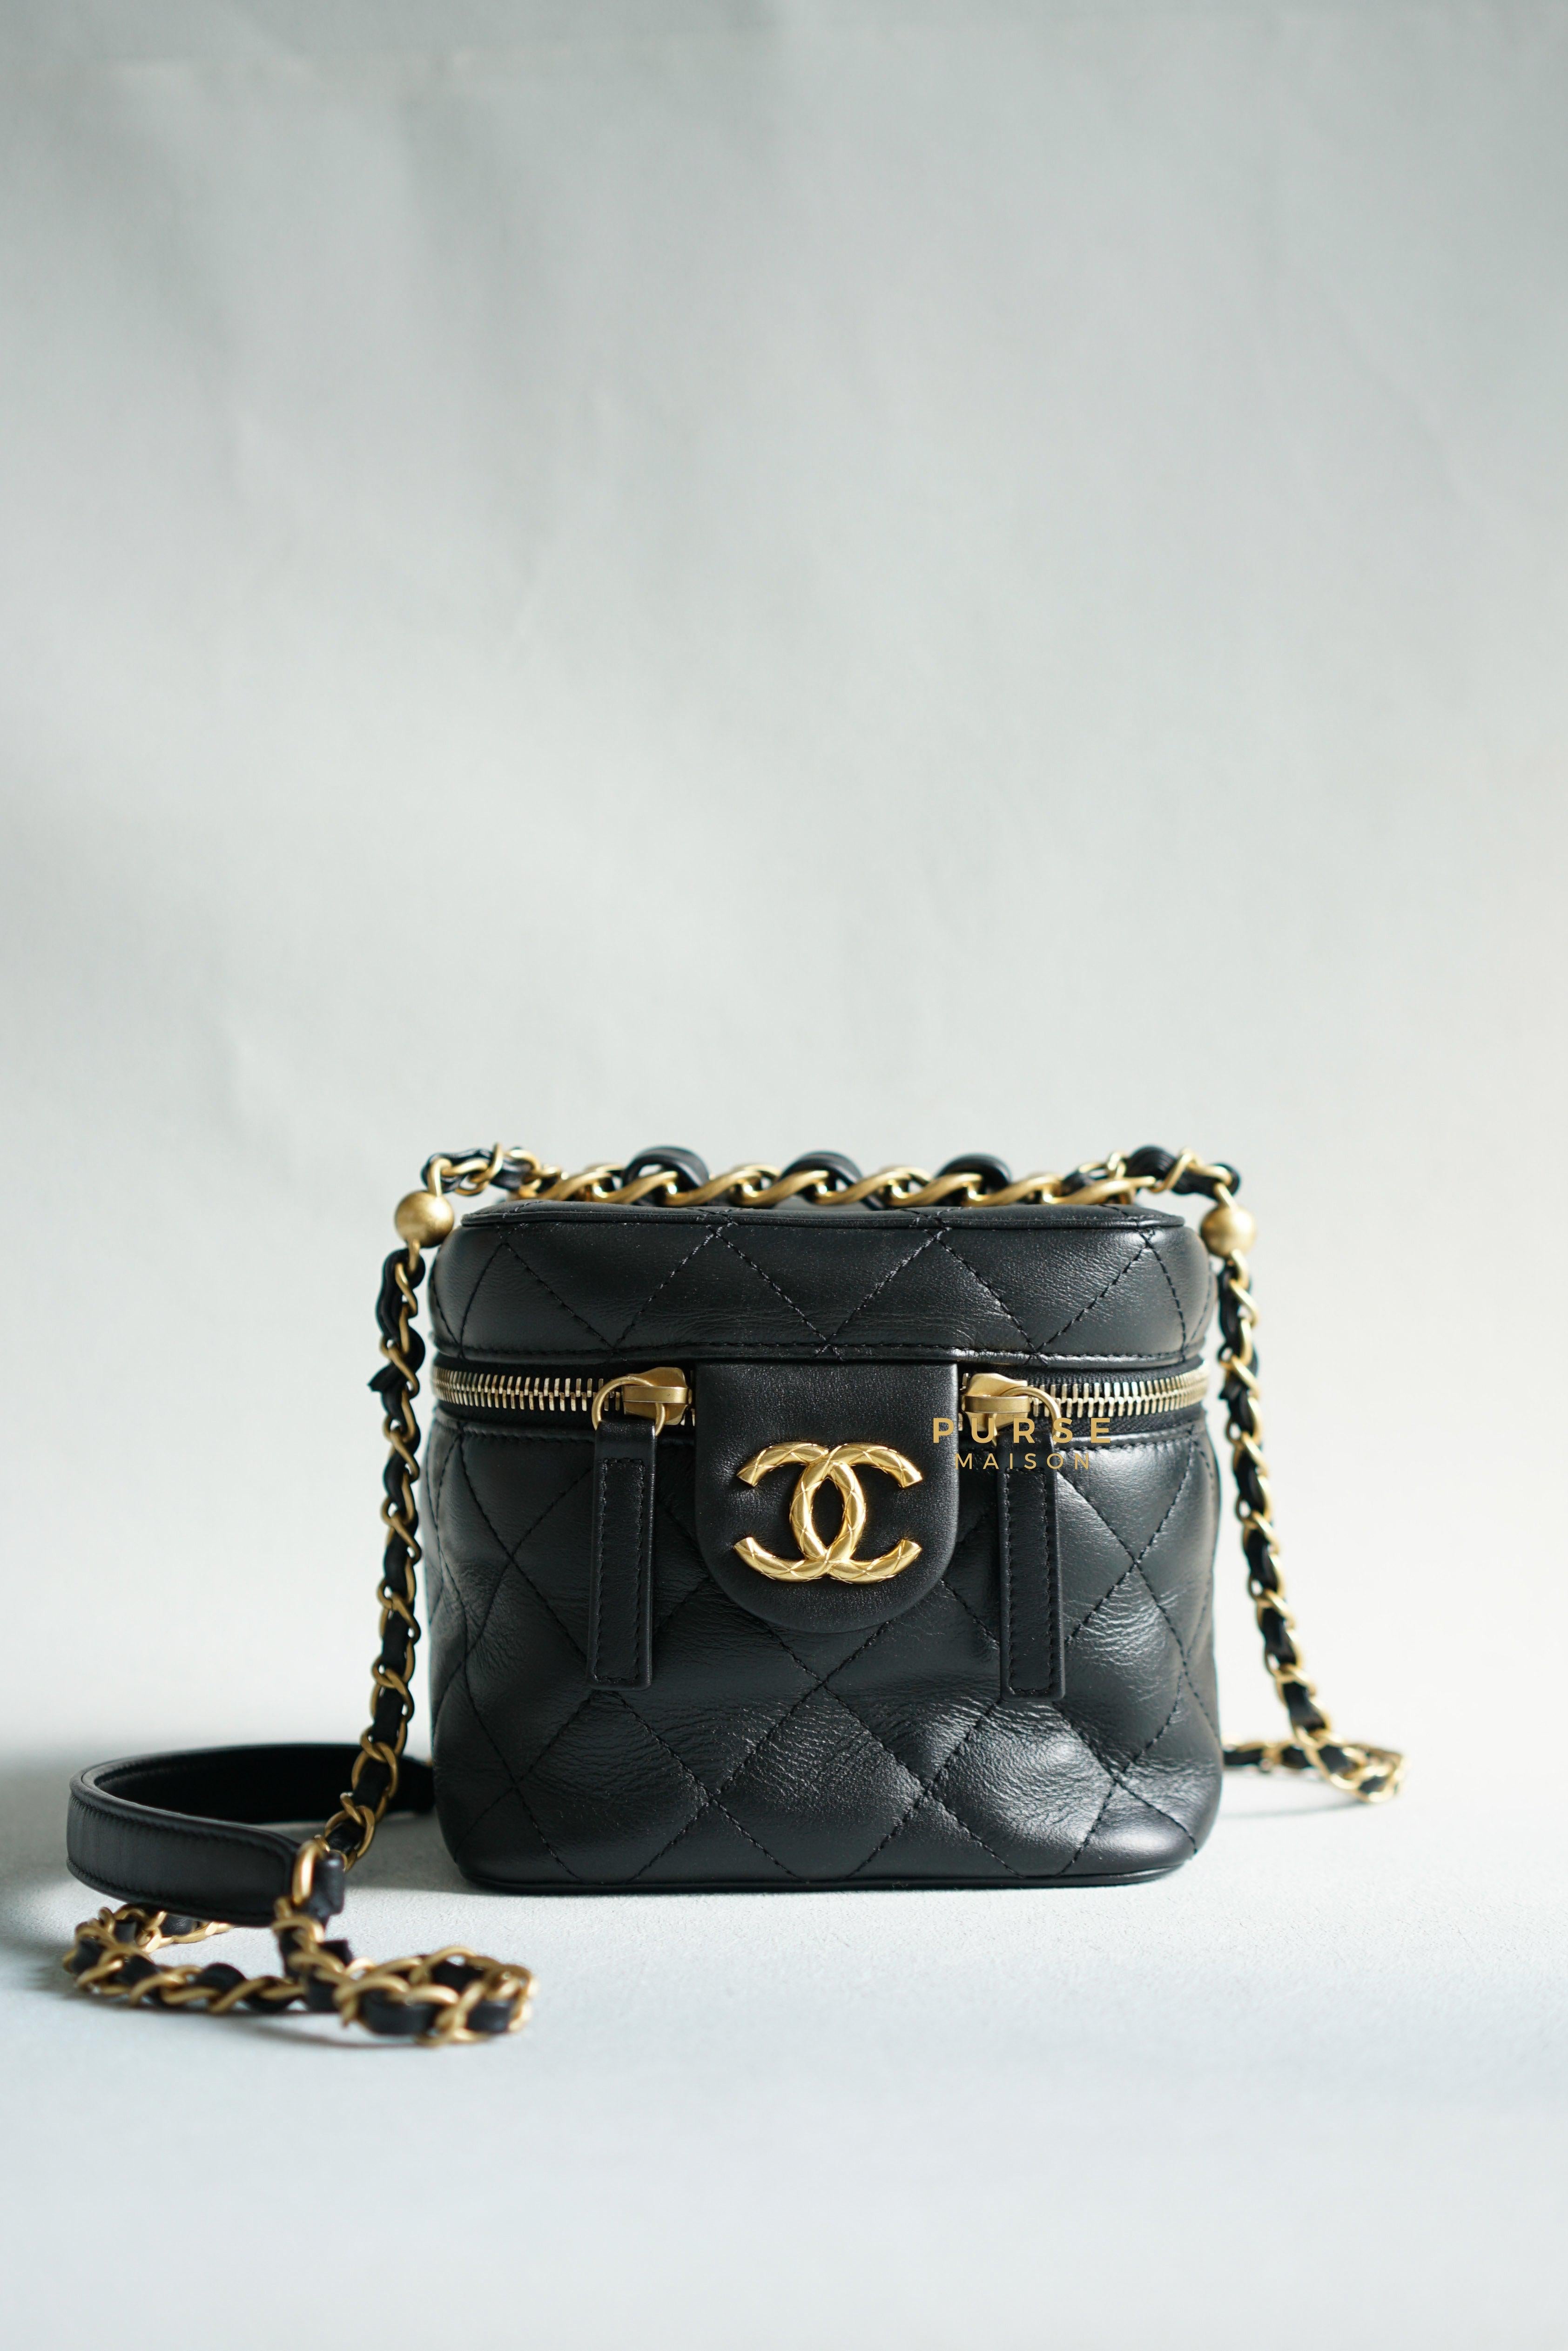 Chanel Vanity Case 22s Lambskin Leather in Aged Gold Hardware (Microchip) | Purse Maison Luxury Bags Shop